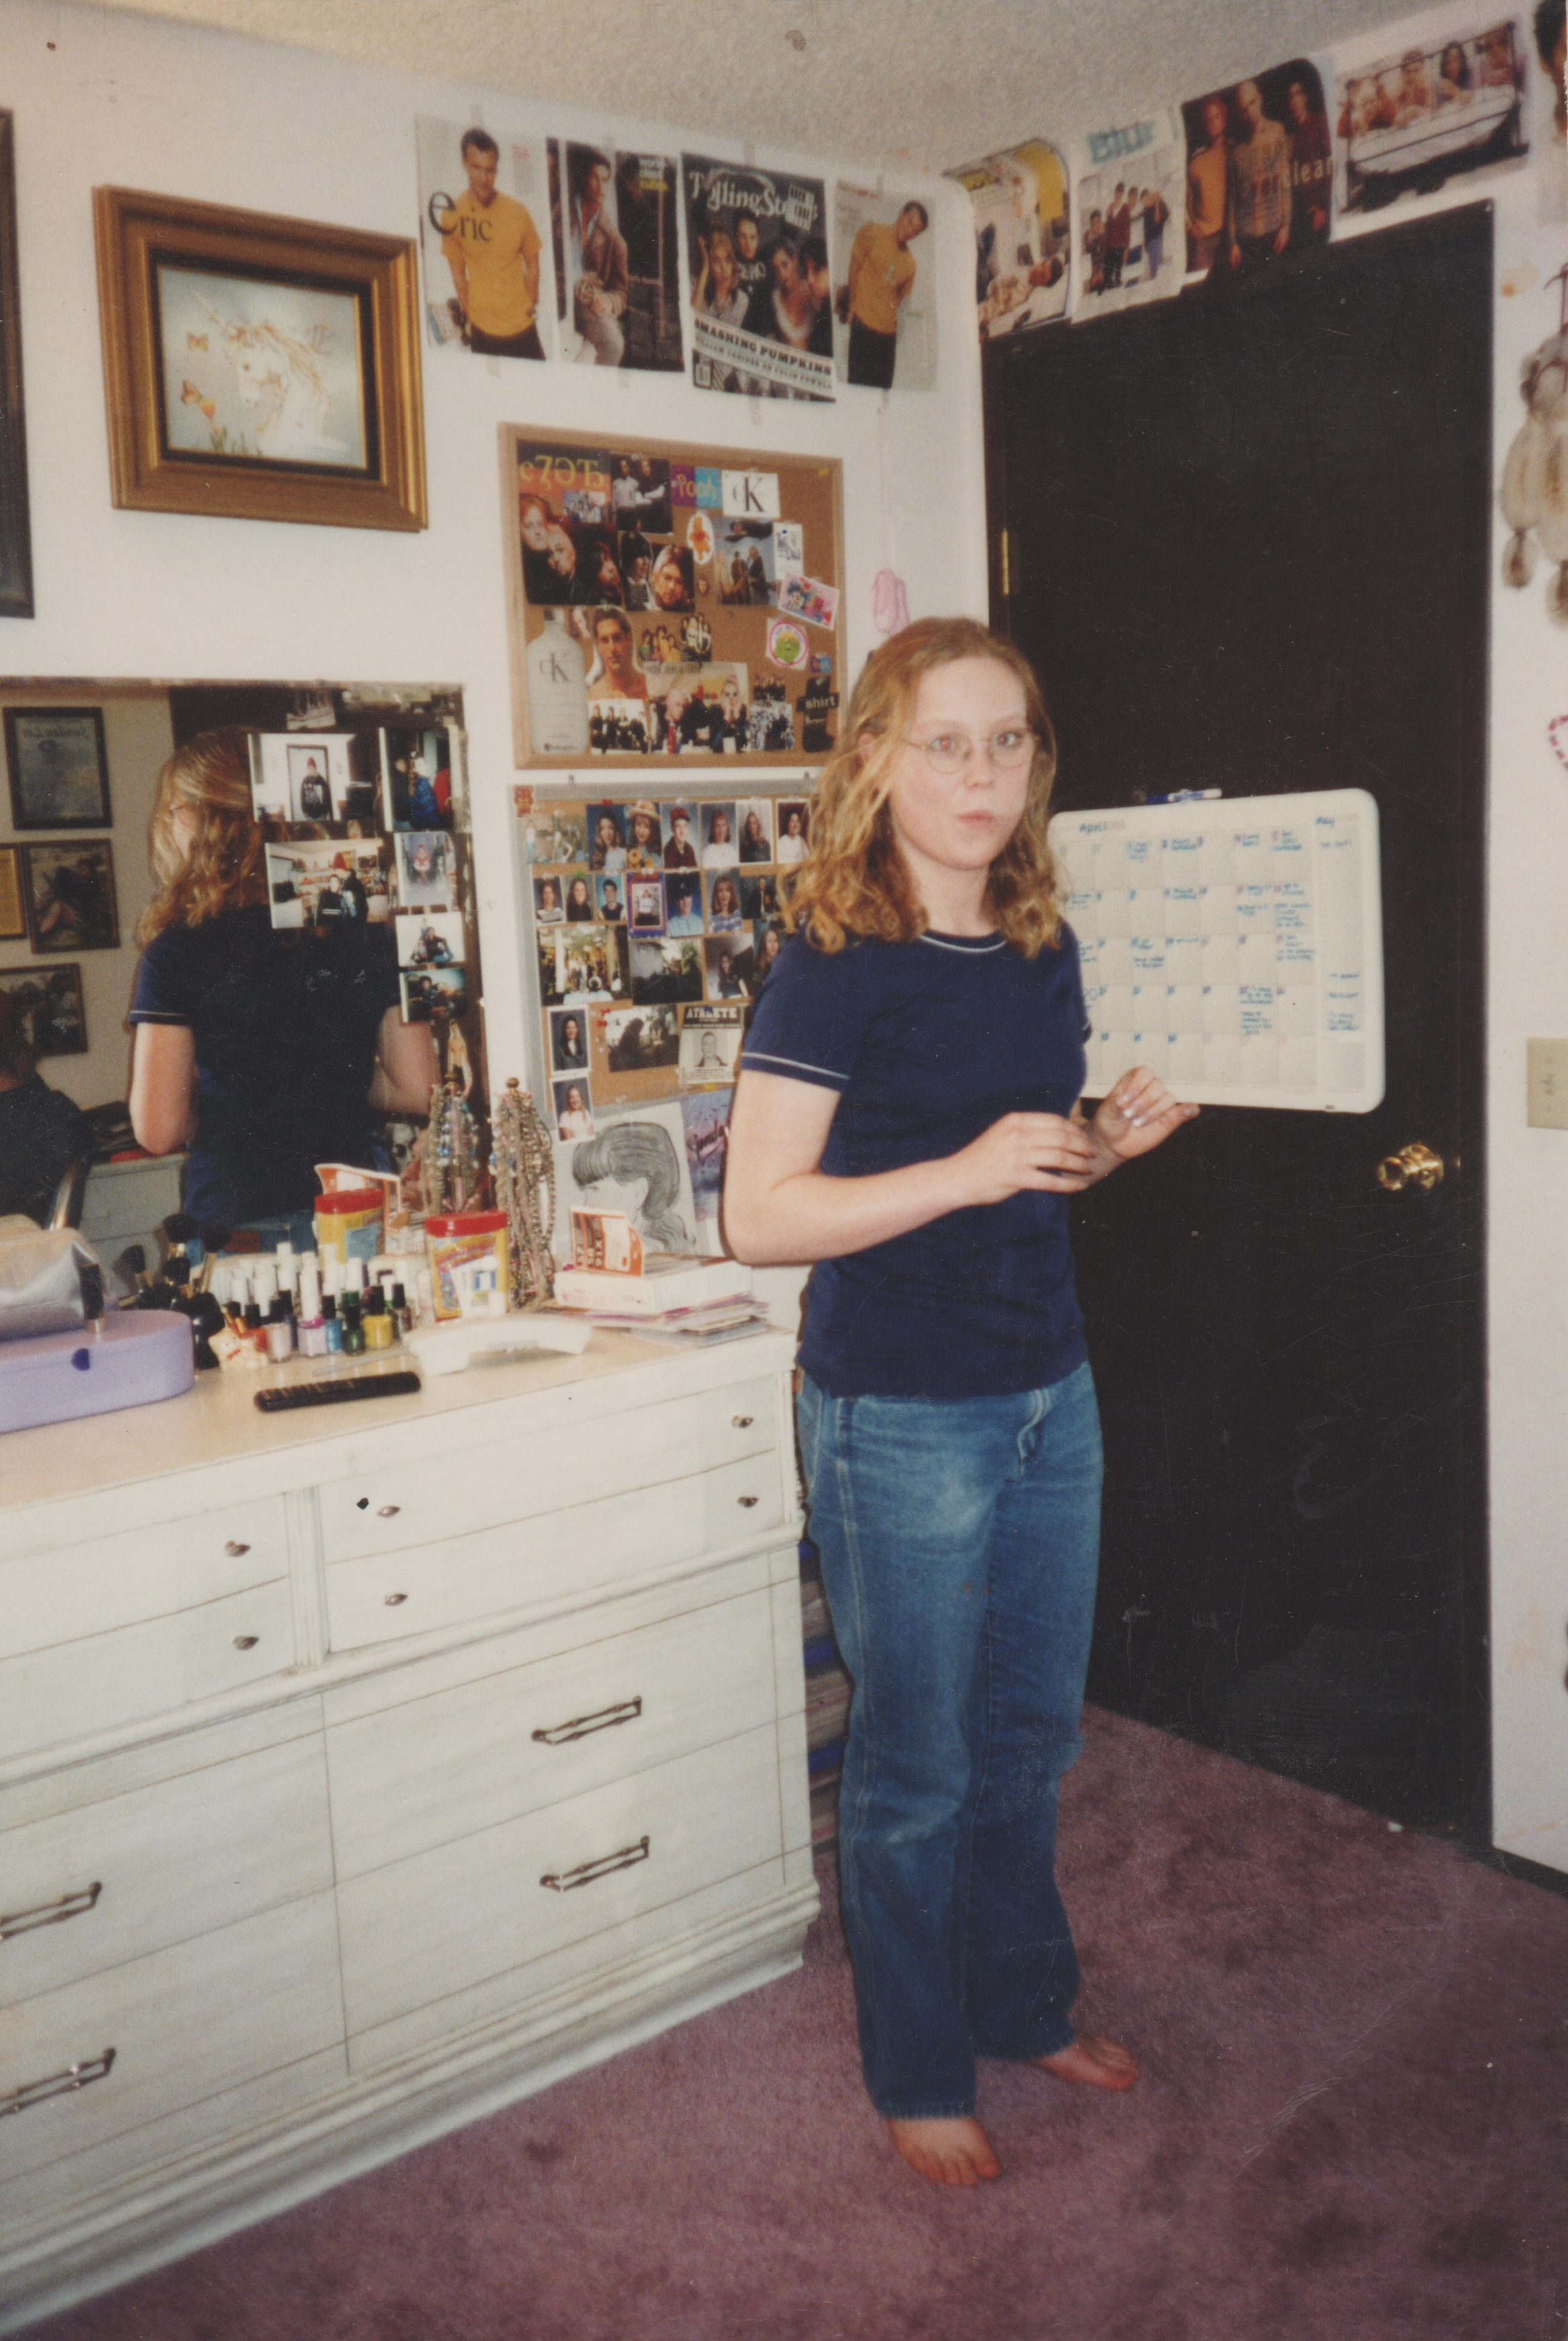 2000's maybe or late 1990's - Katie & her room with pics and things on her wall.jpg